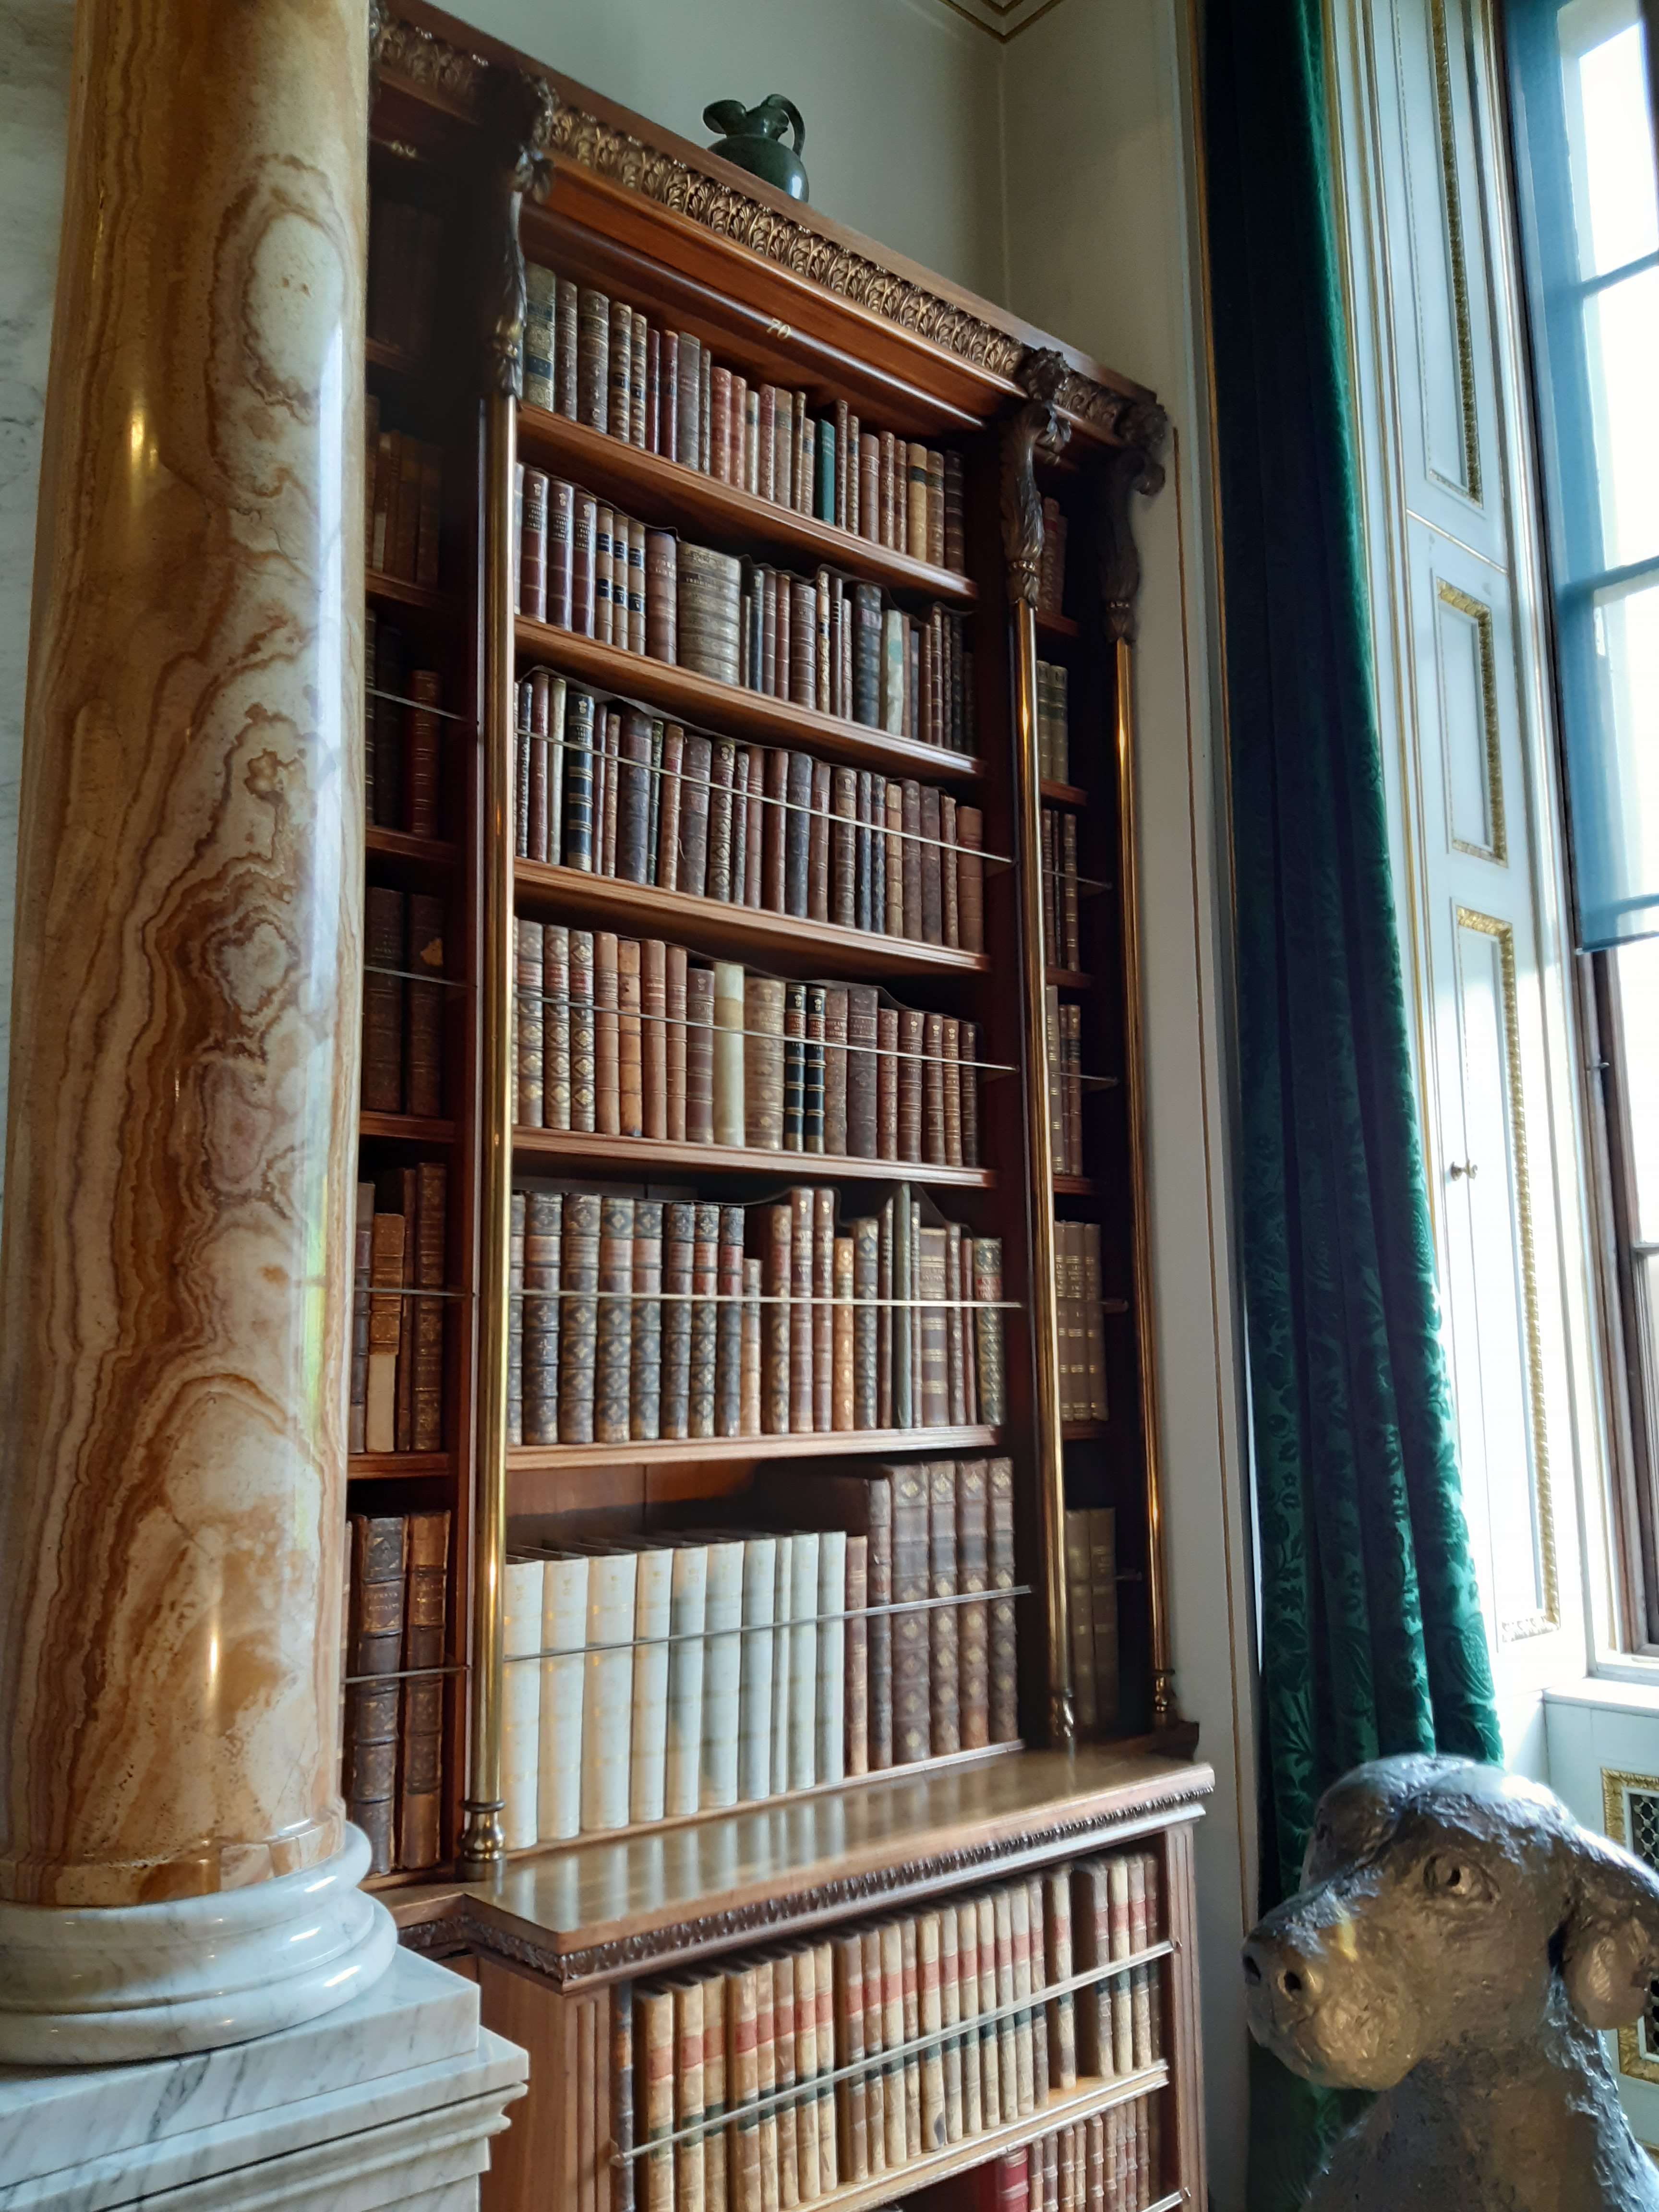 Bookcase in Chatsworth House